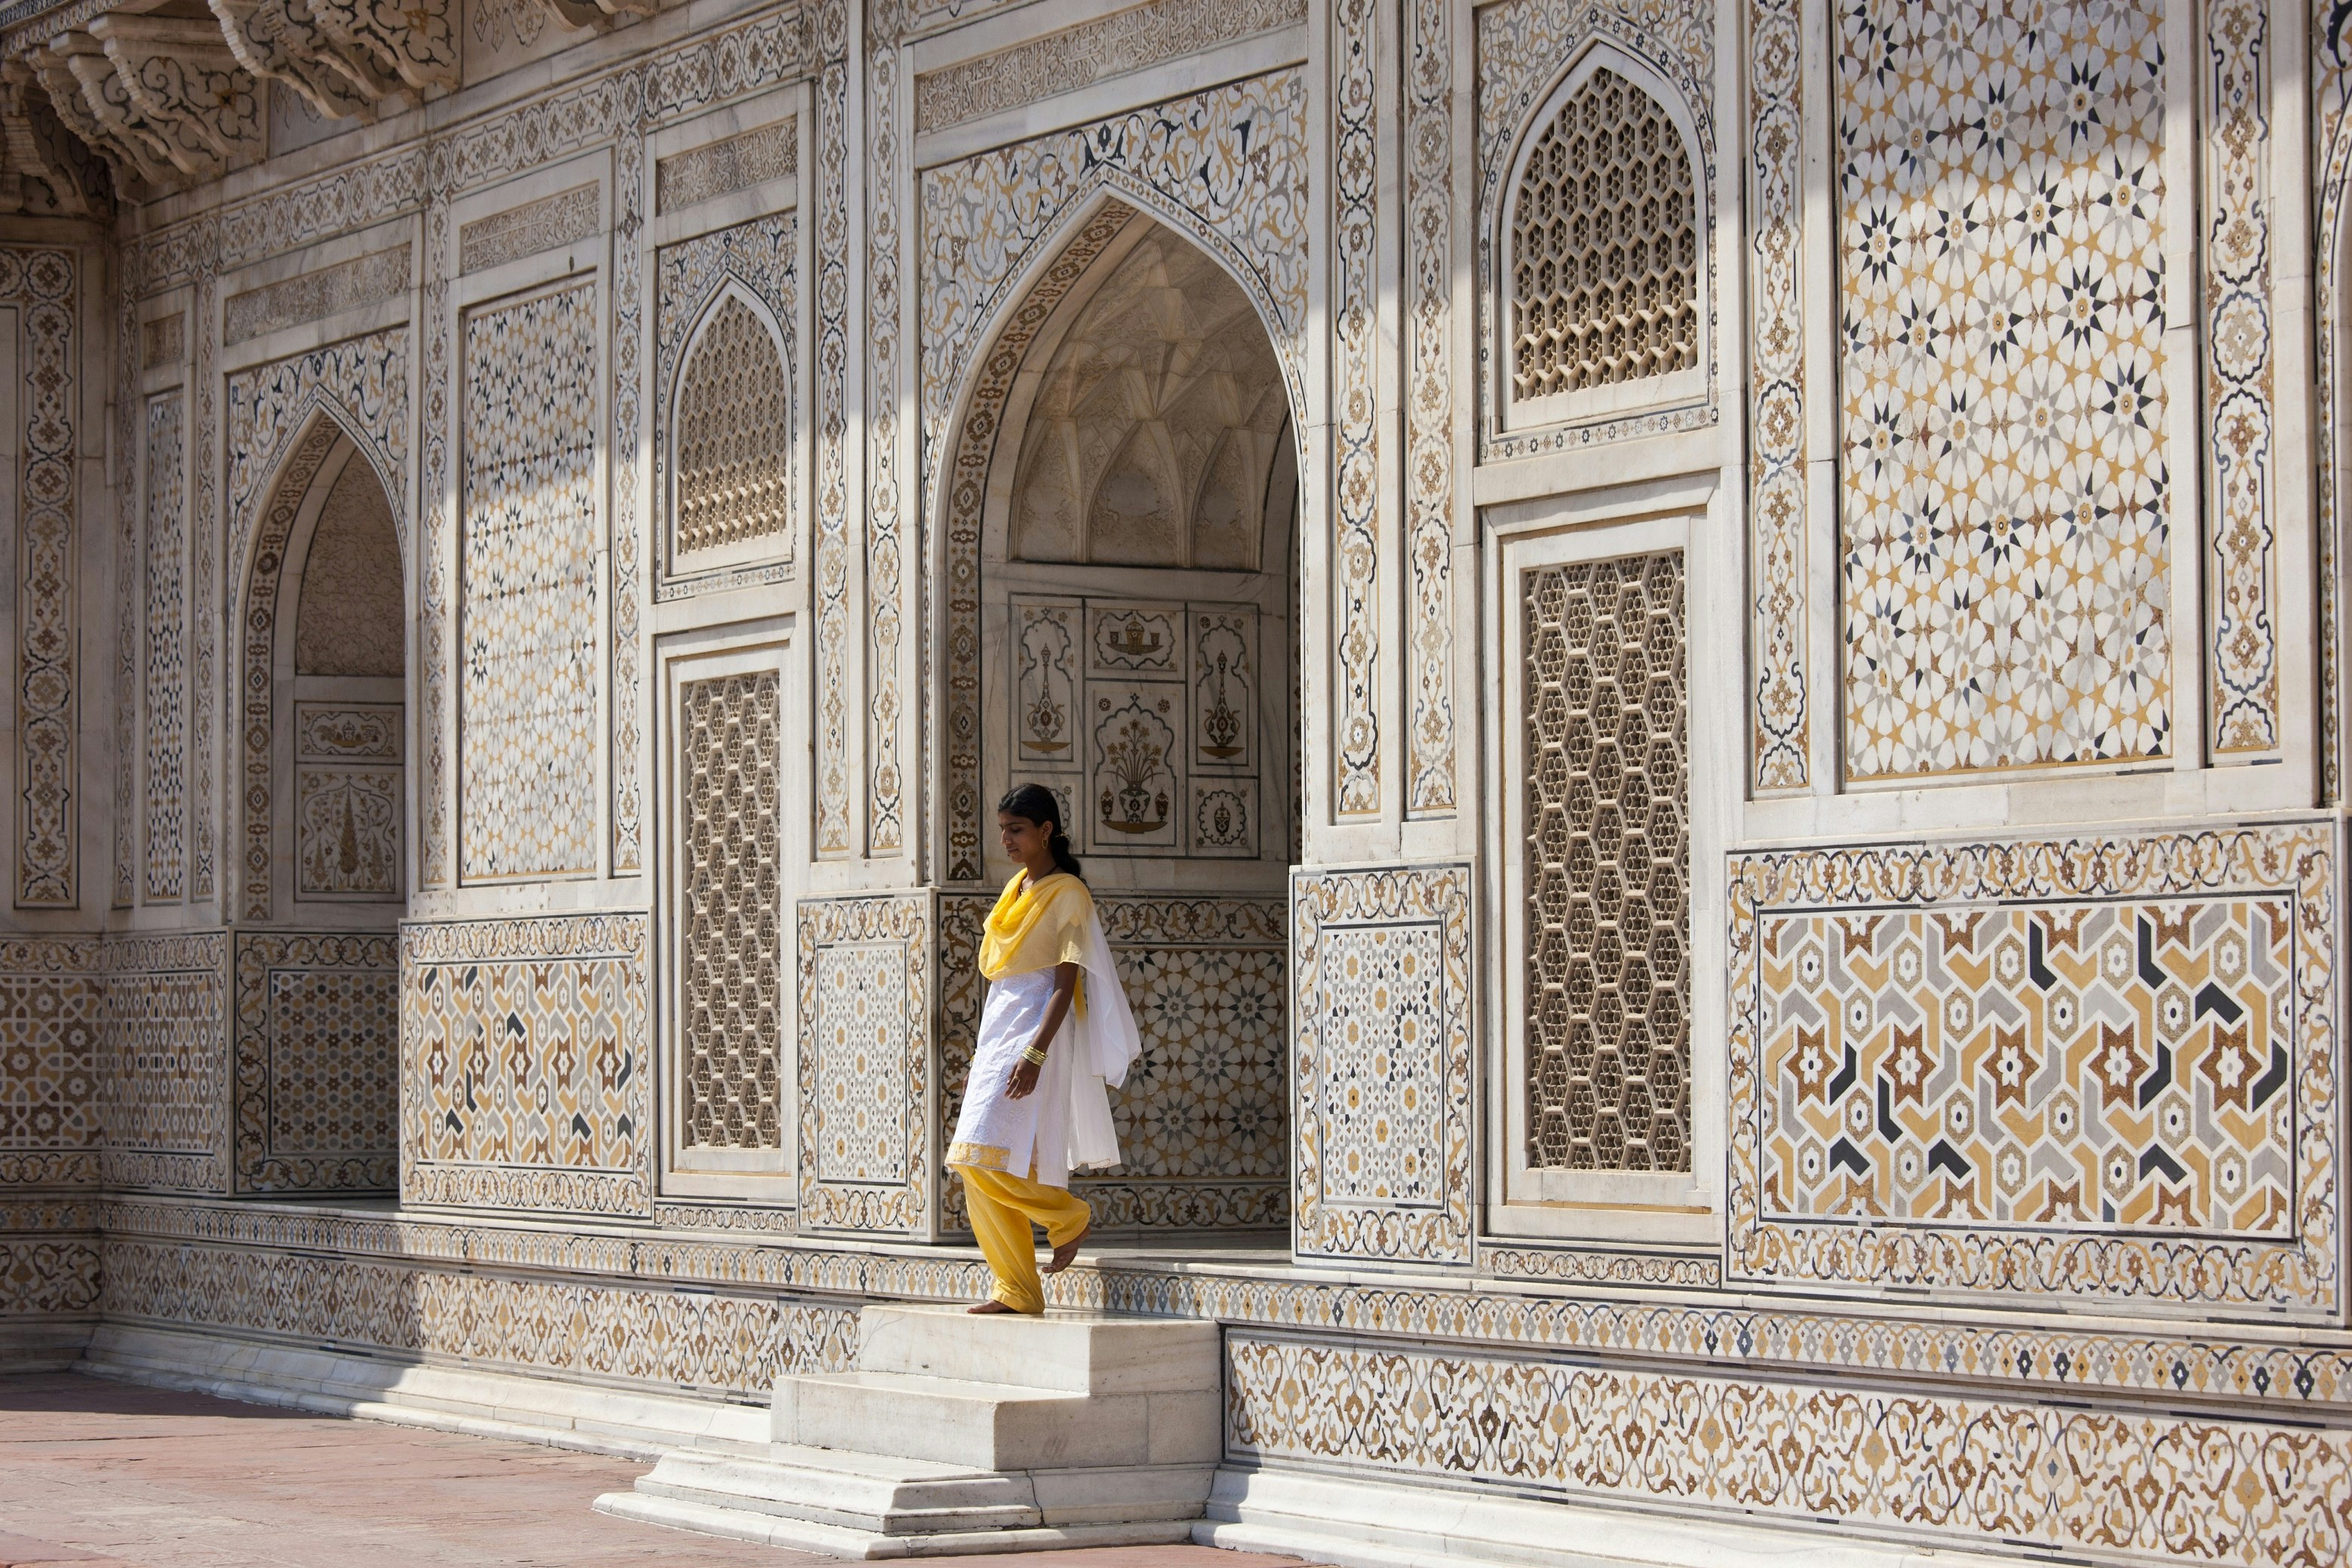 A woman in a yellow sari walks down the steps from the entrance of Itmad-ud-Daulah, a mausoleum in Agra. The white mausoleum is covered in colourful tiles.